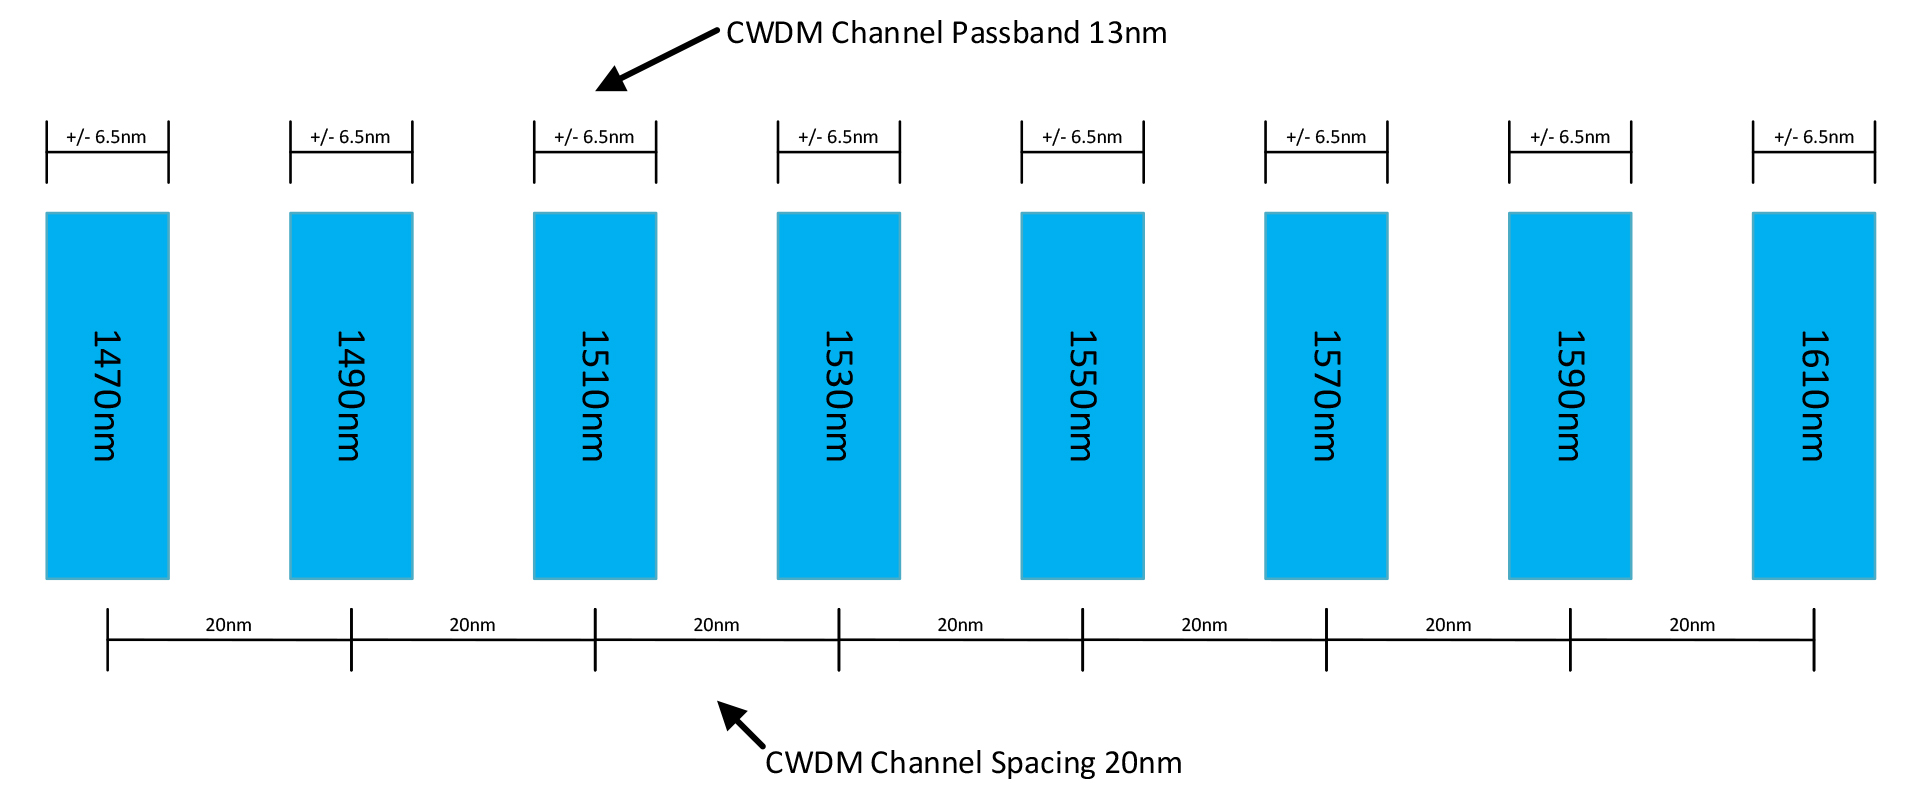 Graph showing CWDM Channel Passband Spacing